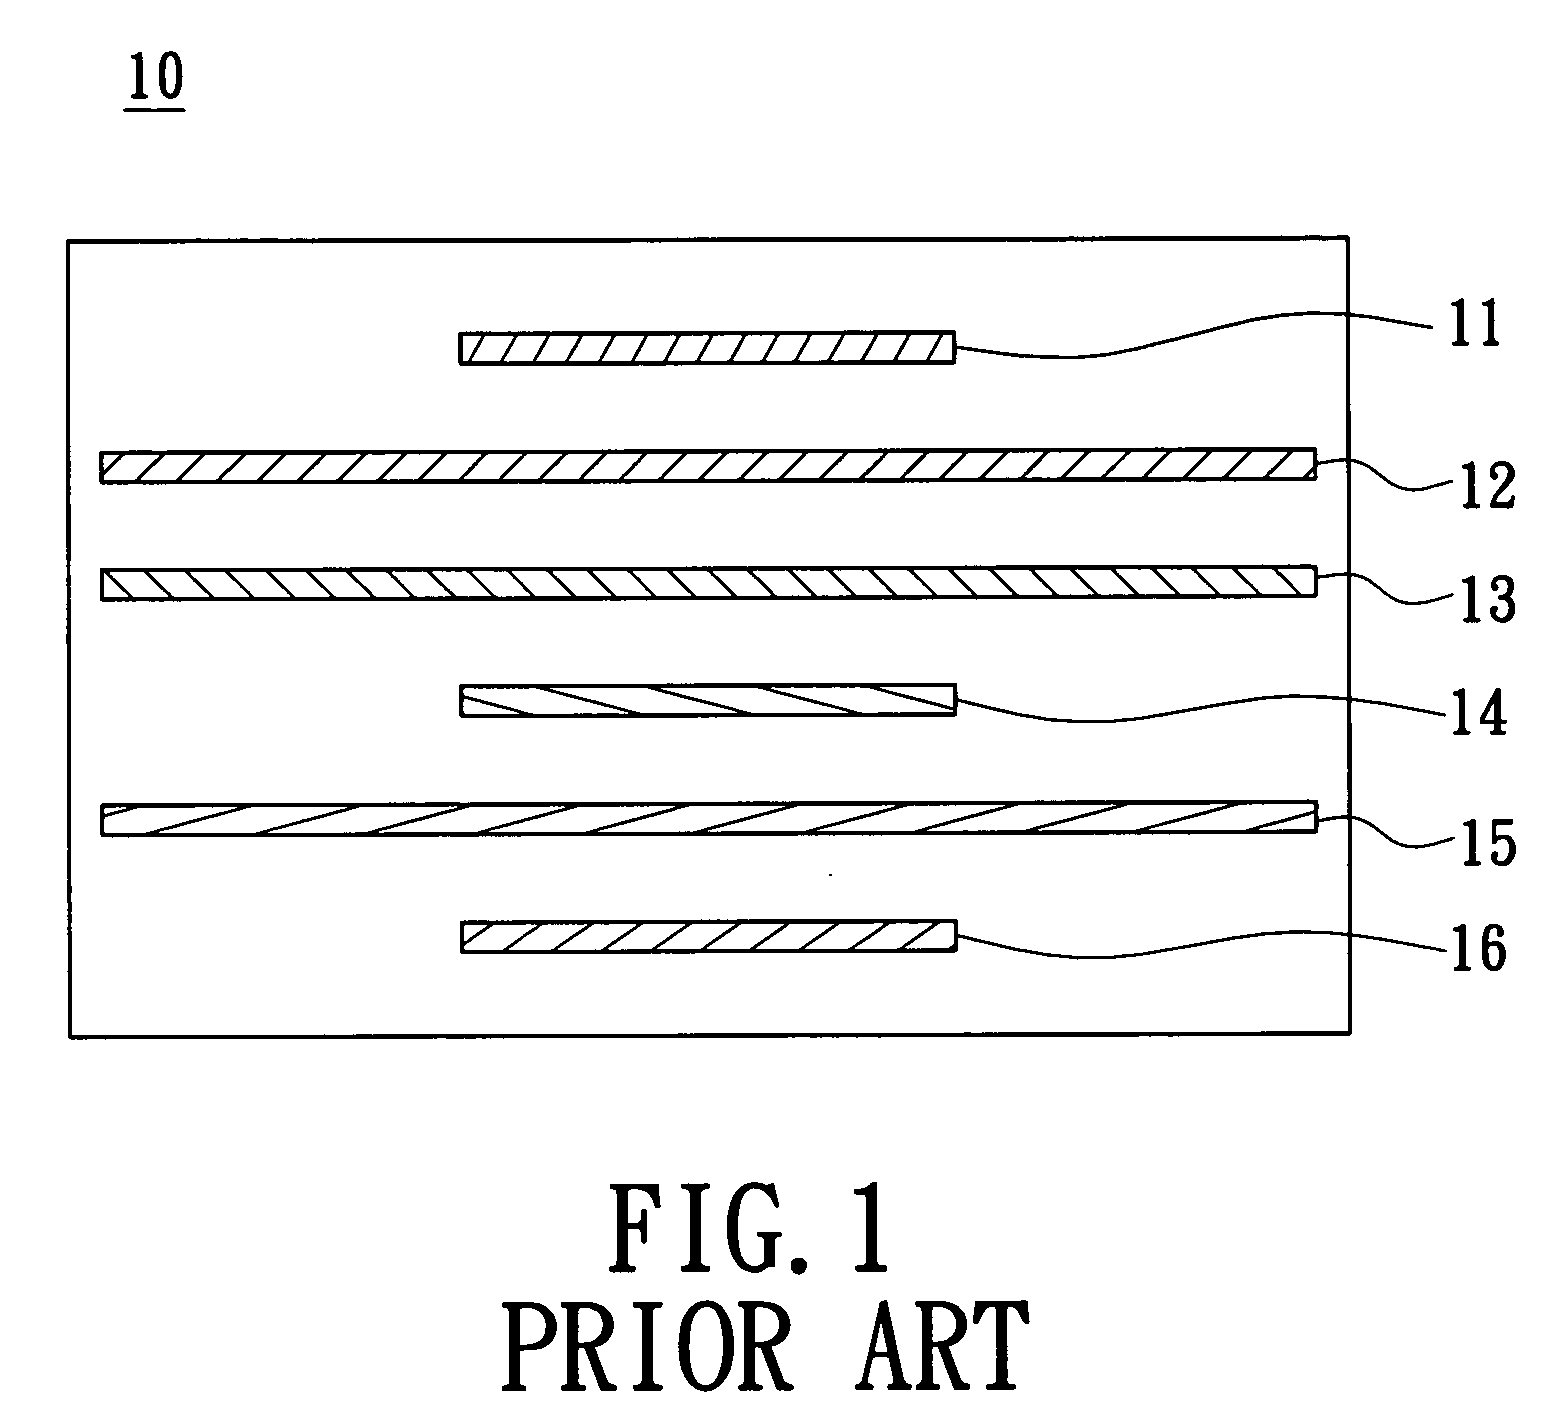 Structure of a circuit board for improving the performance of routing traces